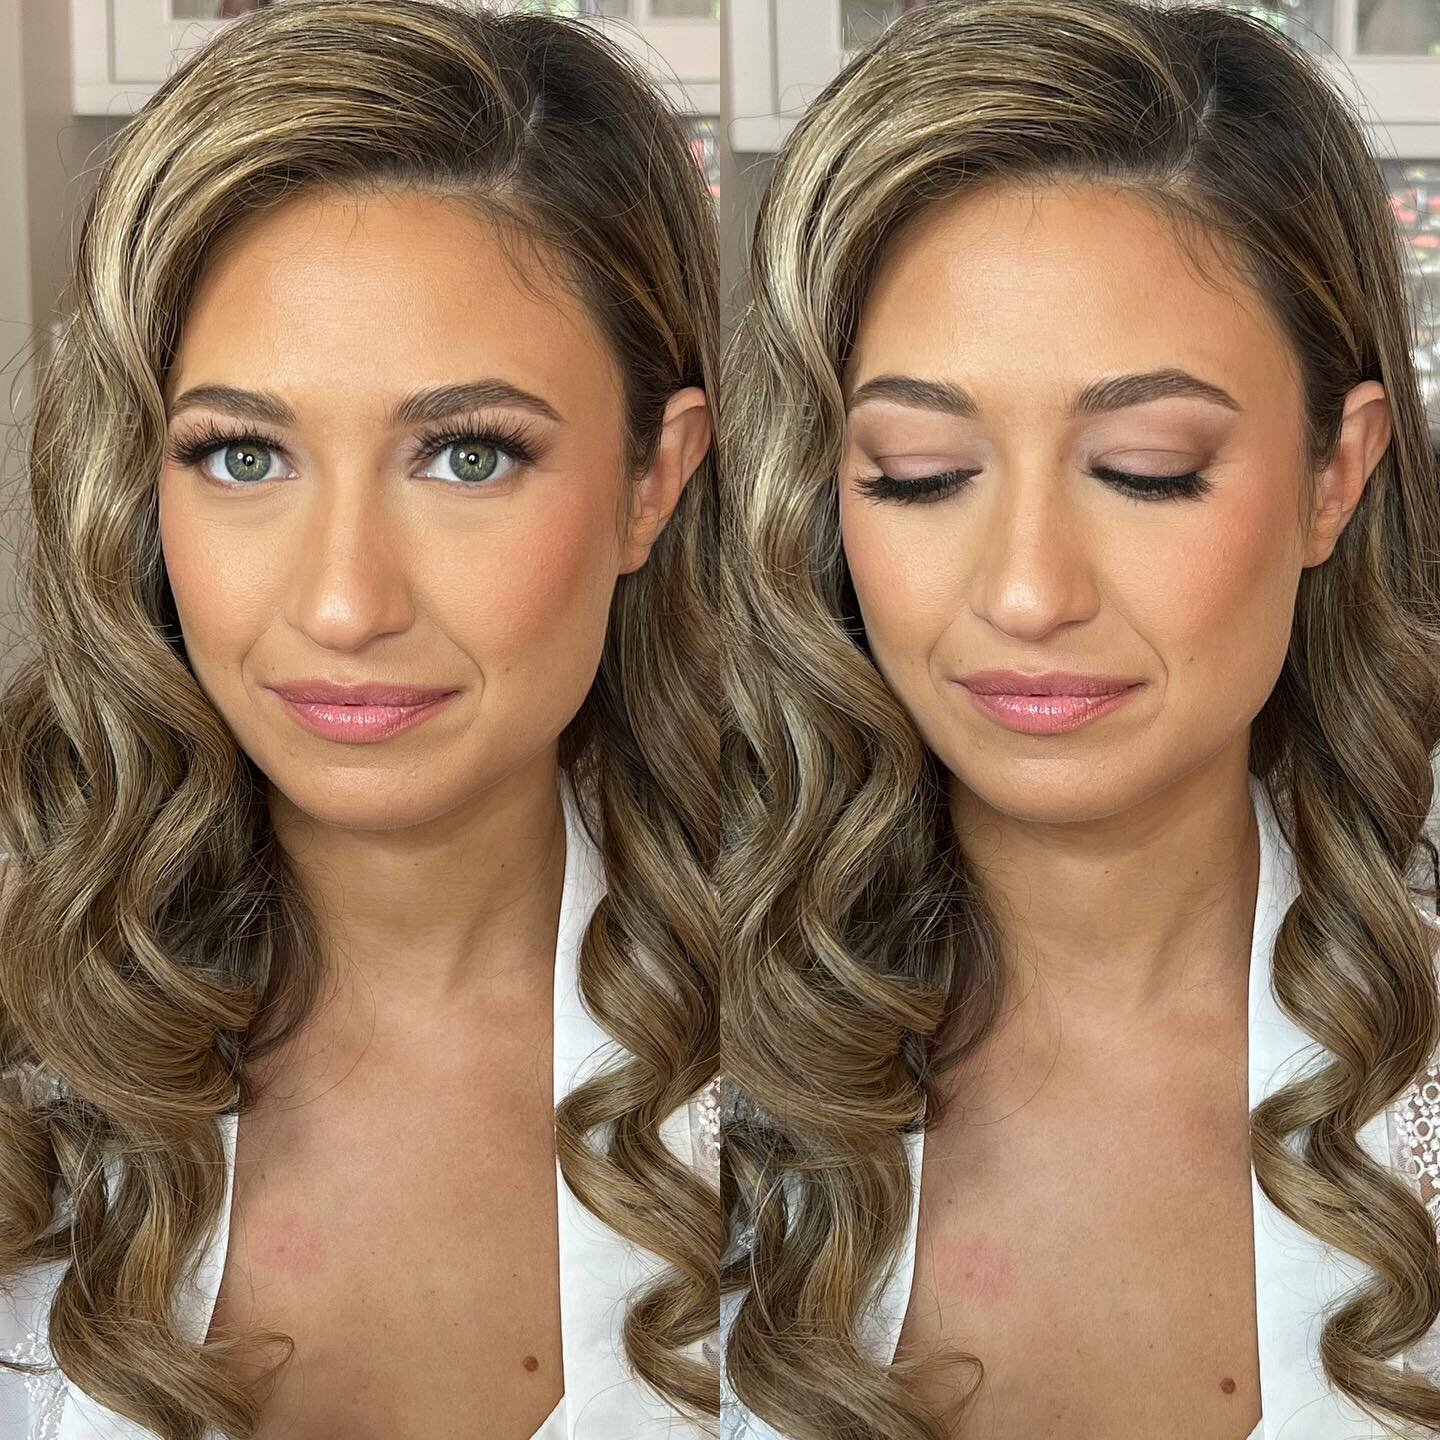 I&rsquo;m getting classic Victoria Secret super model vibes from @krista__g for her wedding day look.

Makeup by Stephanie 
Hair by @michellewiththegoodhair 

#parlourbeaute #buffalobrides #buffalowedding #buffalomakeupartist #buffalomua #wnysalon #b